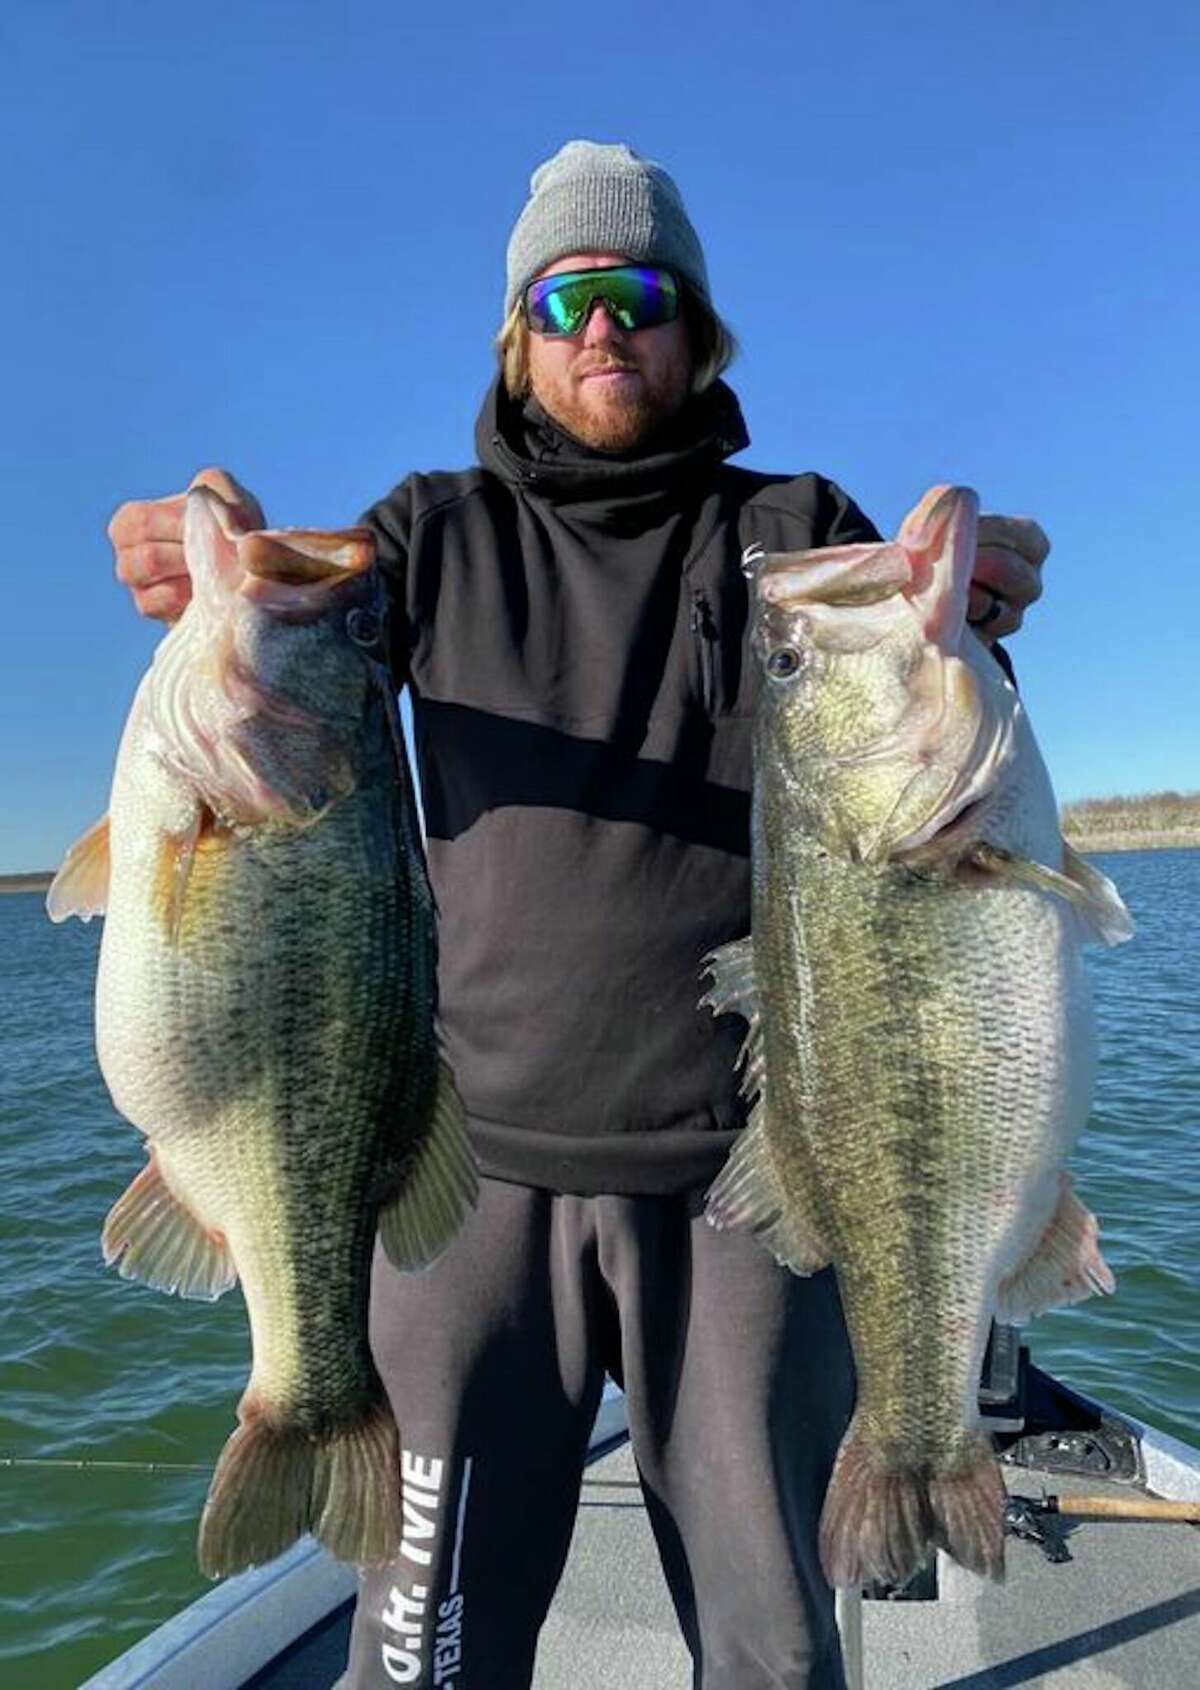 Big bass expert Josh Jones claims his boat has accounted for 41 O.H. Ivie bass over 10 pounds since Jan. 1. On Feb. 23, Jones boated this pair of 12.5 pounders less than five minutes apart and his guide client reeled in a 10.59 pounder on the same day. 